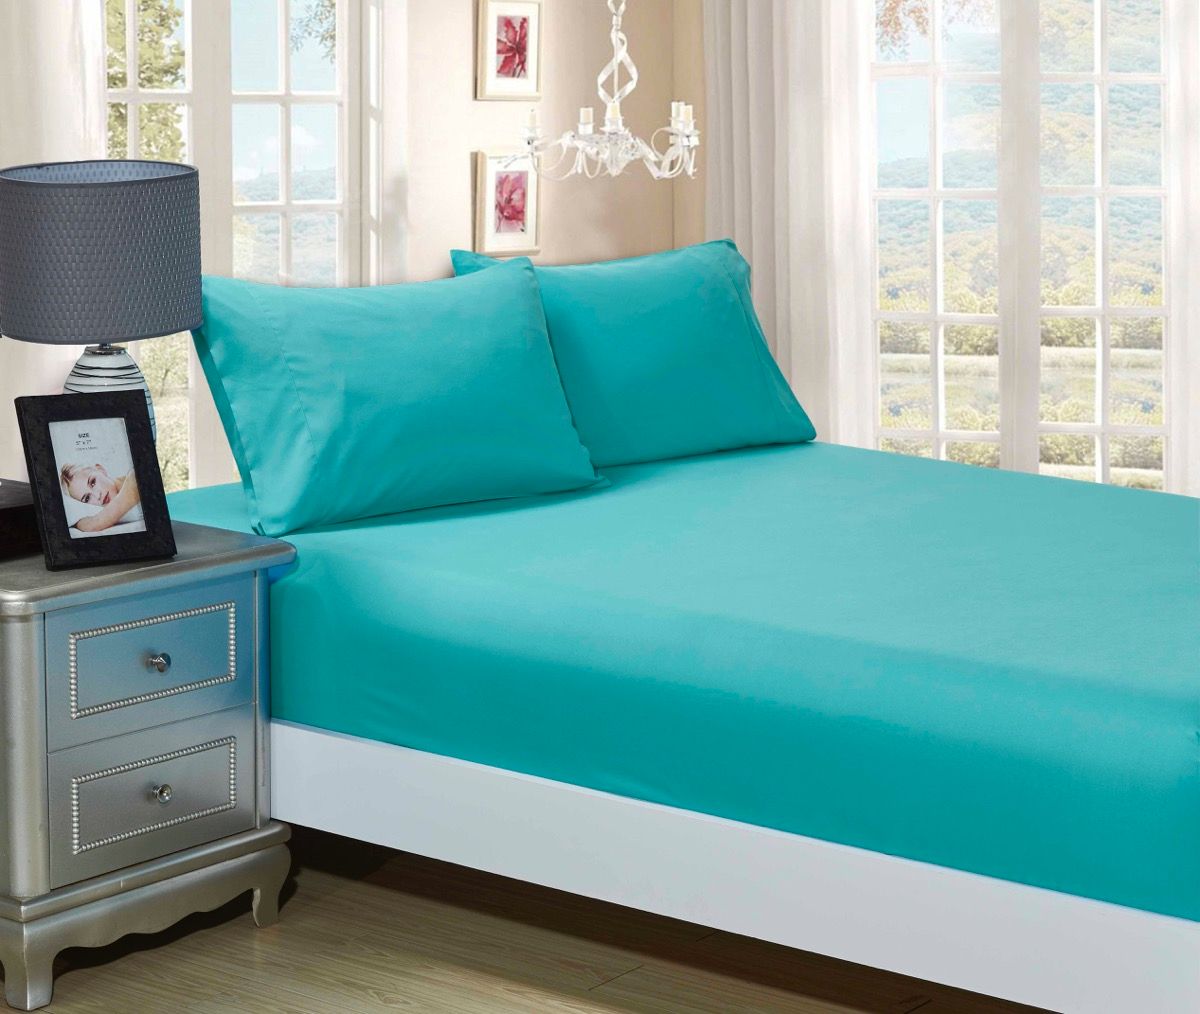 Super Soft 3-Piece Super King Size Bed Fitted Sheet & 2 Pillowcases Set - Teal